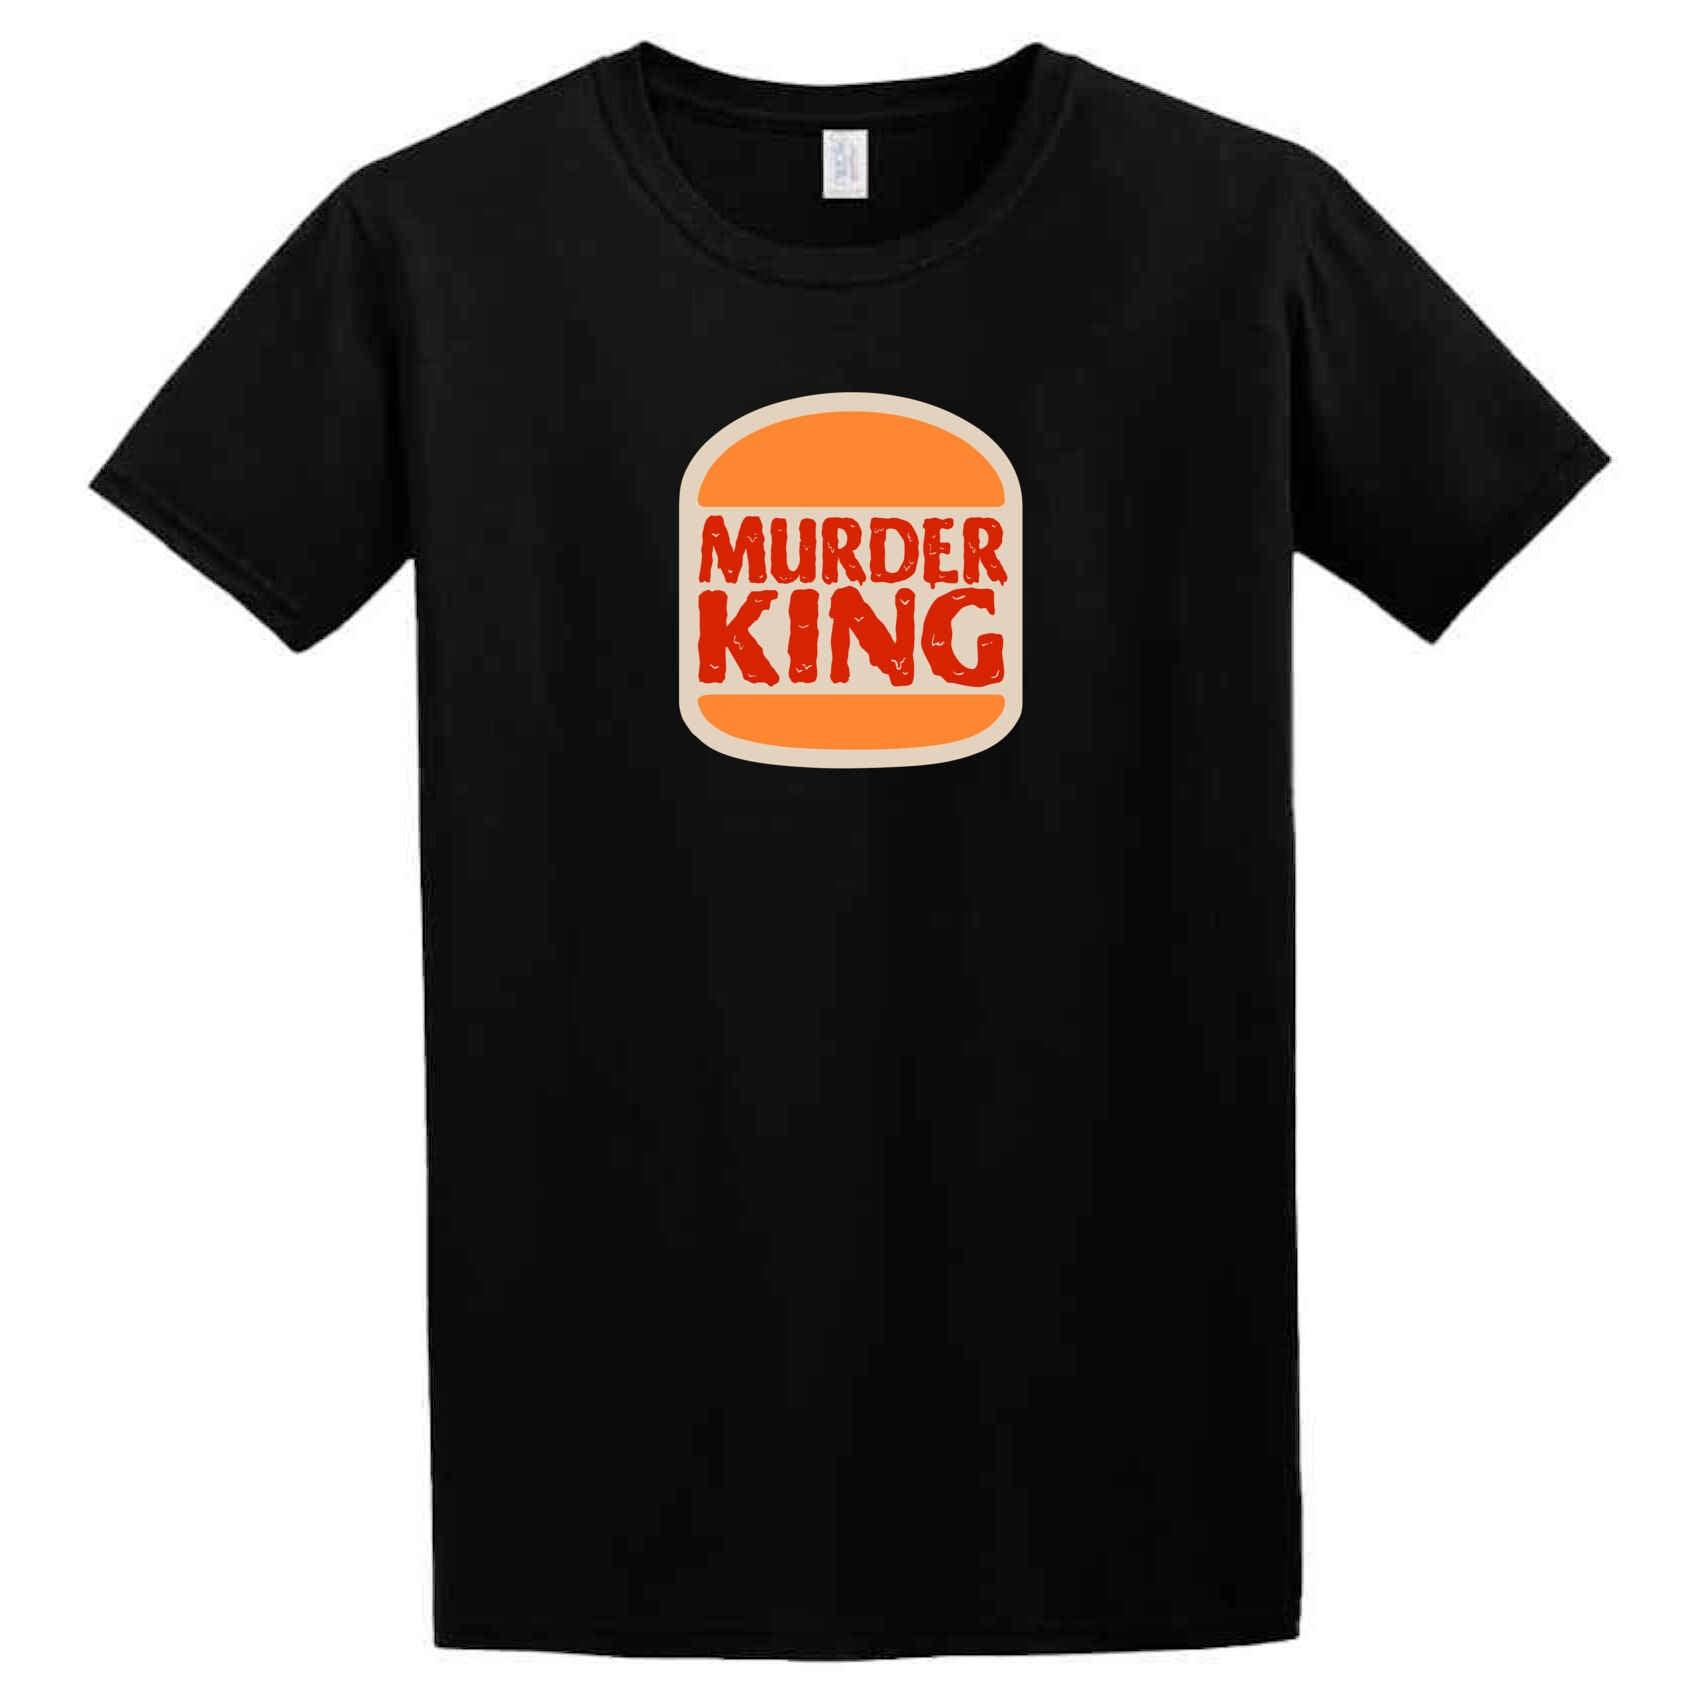 A Twisted Gifts Murder King T-Shirt, perfect for those who love Burger King joke t-shirts with a touch of fast food humor.